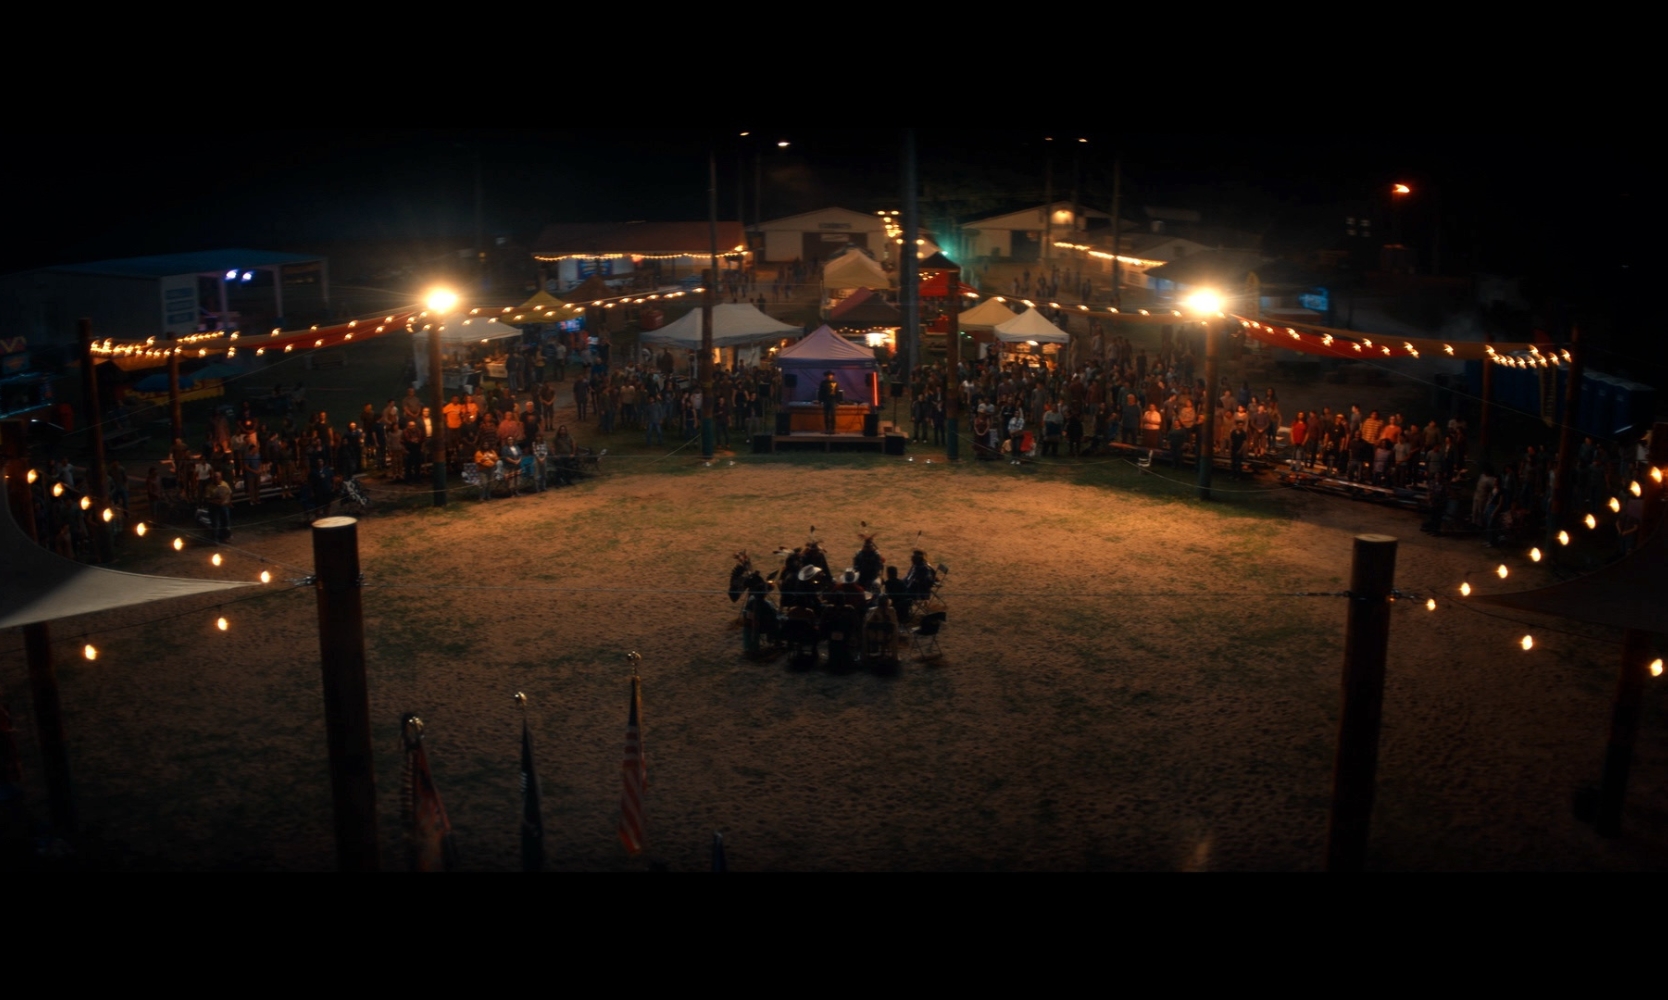 Powwow site with performers